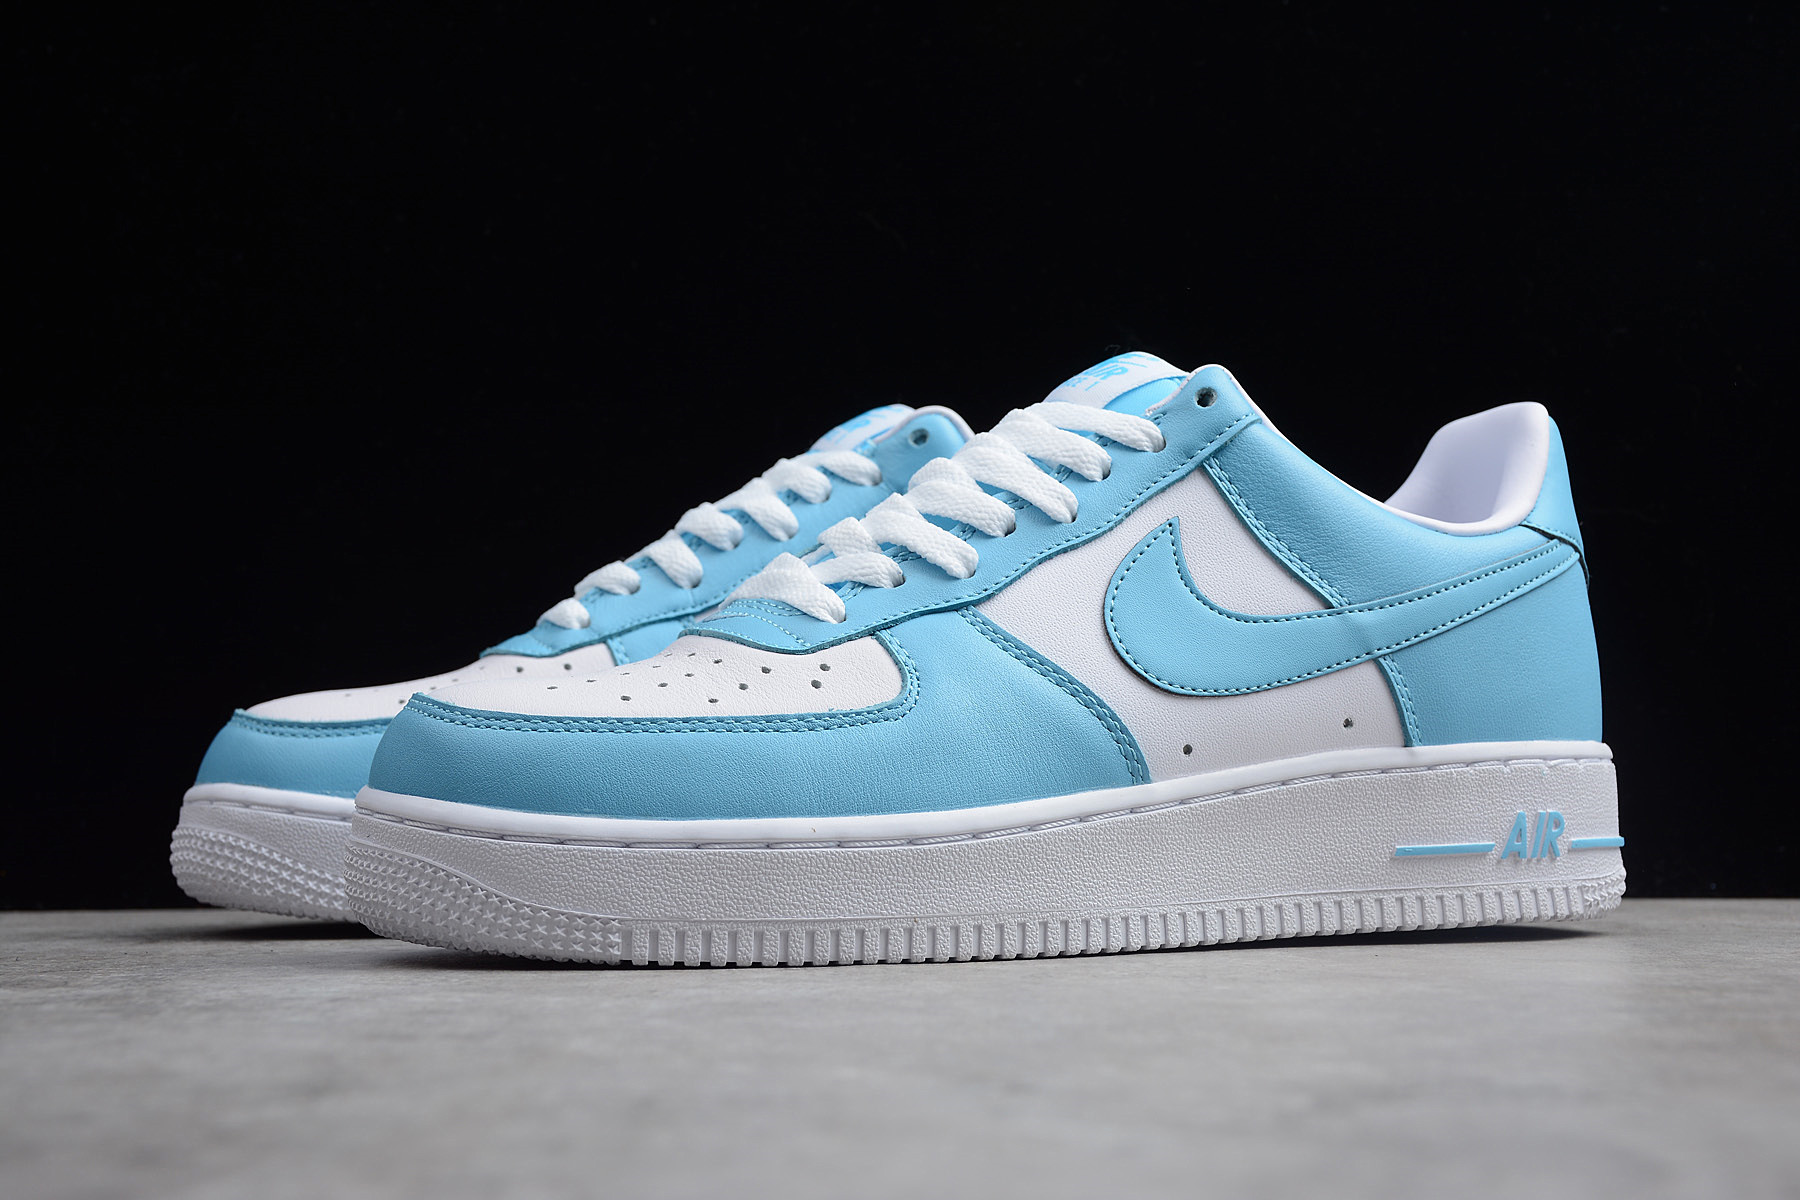 Nike Air Force 1 Low "UNC" Blue Gale/White AQ4134400